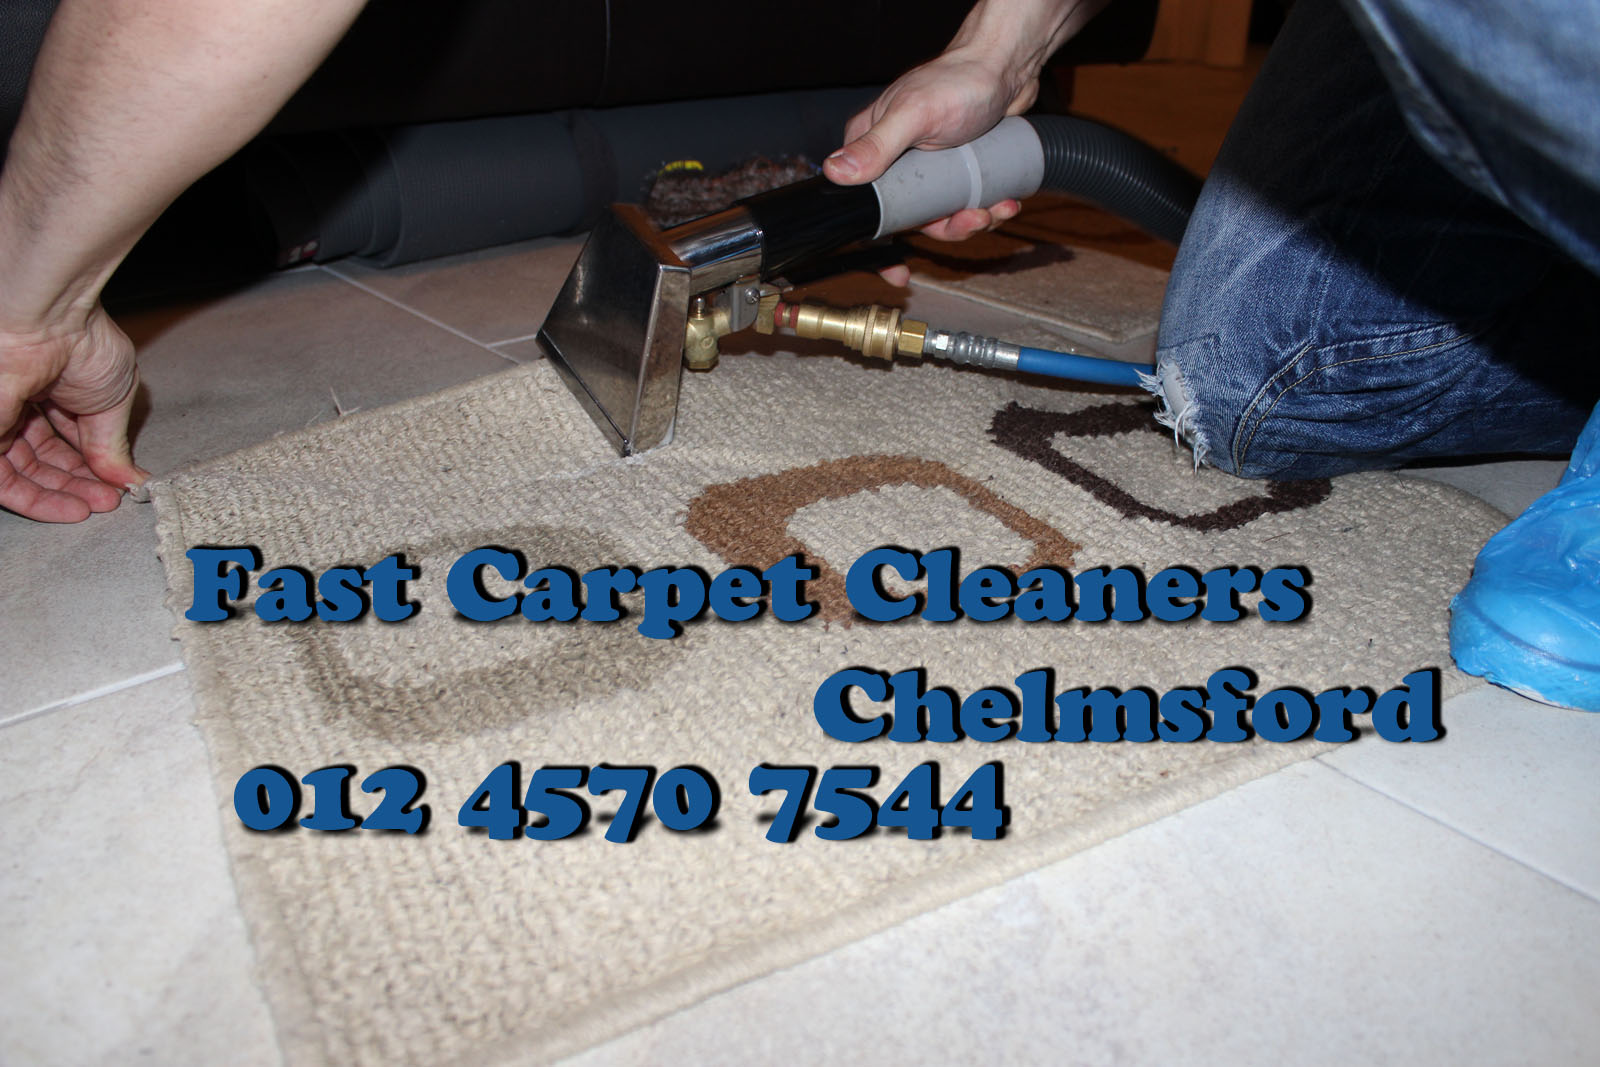 Carpet-Cleaning-Service-Chelmsford